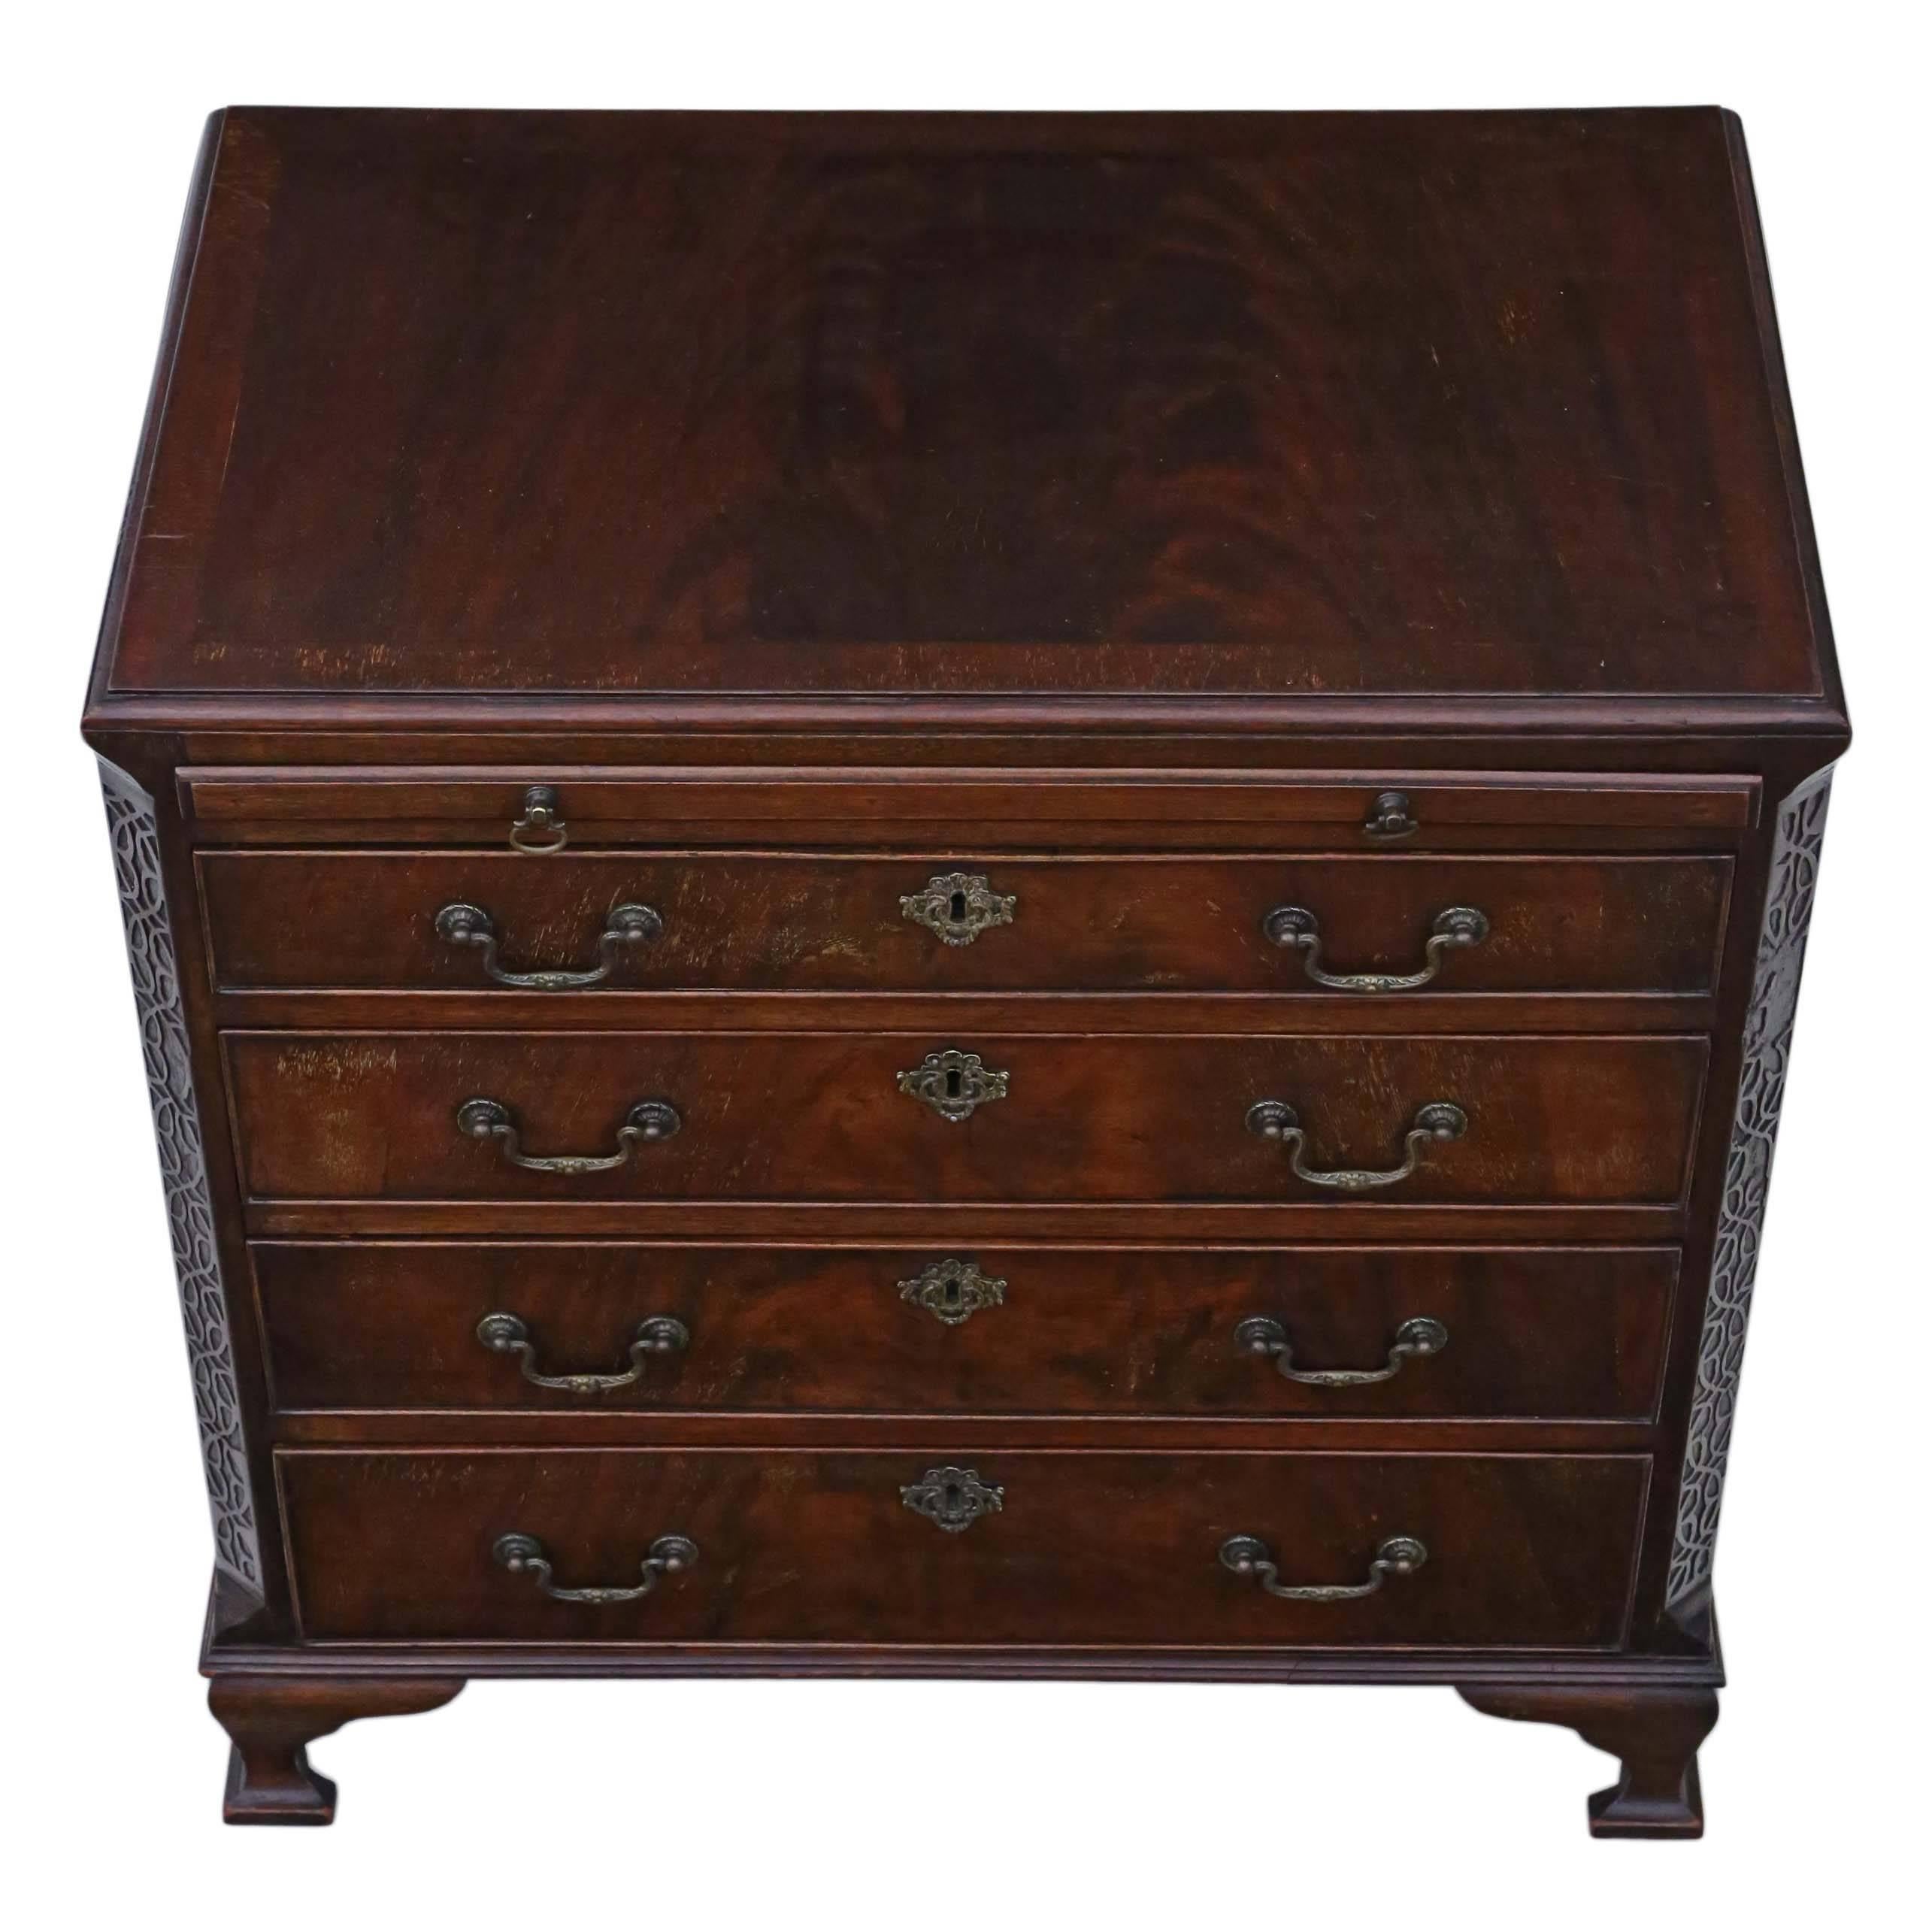 Antique quality small Georgian revival, circa 1910 mahogany chest of drawers. Great small size and proportions.

No loose joints and the oak lined drawers slide freely. Fantastic blind fret cut decoration to the canted corners and a brushing